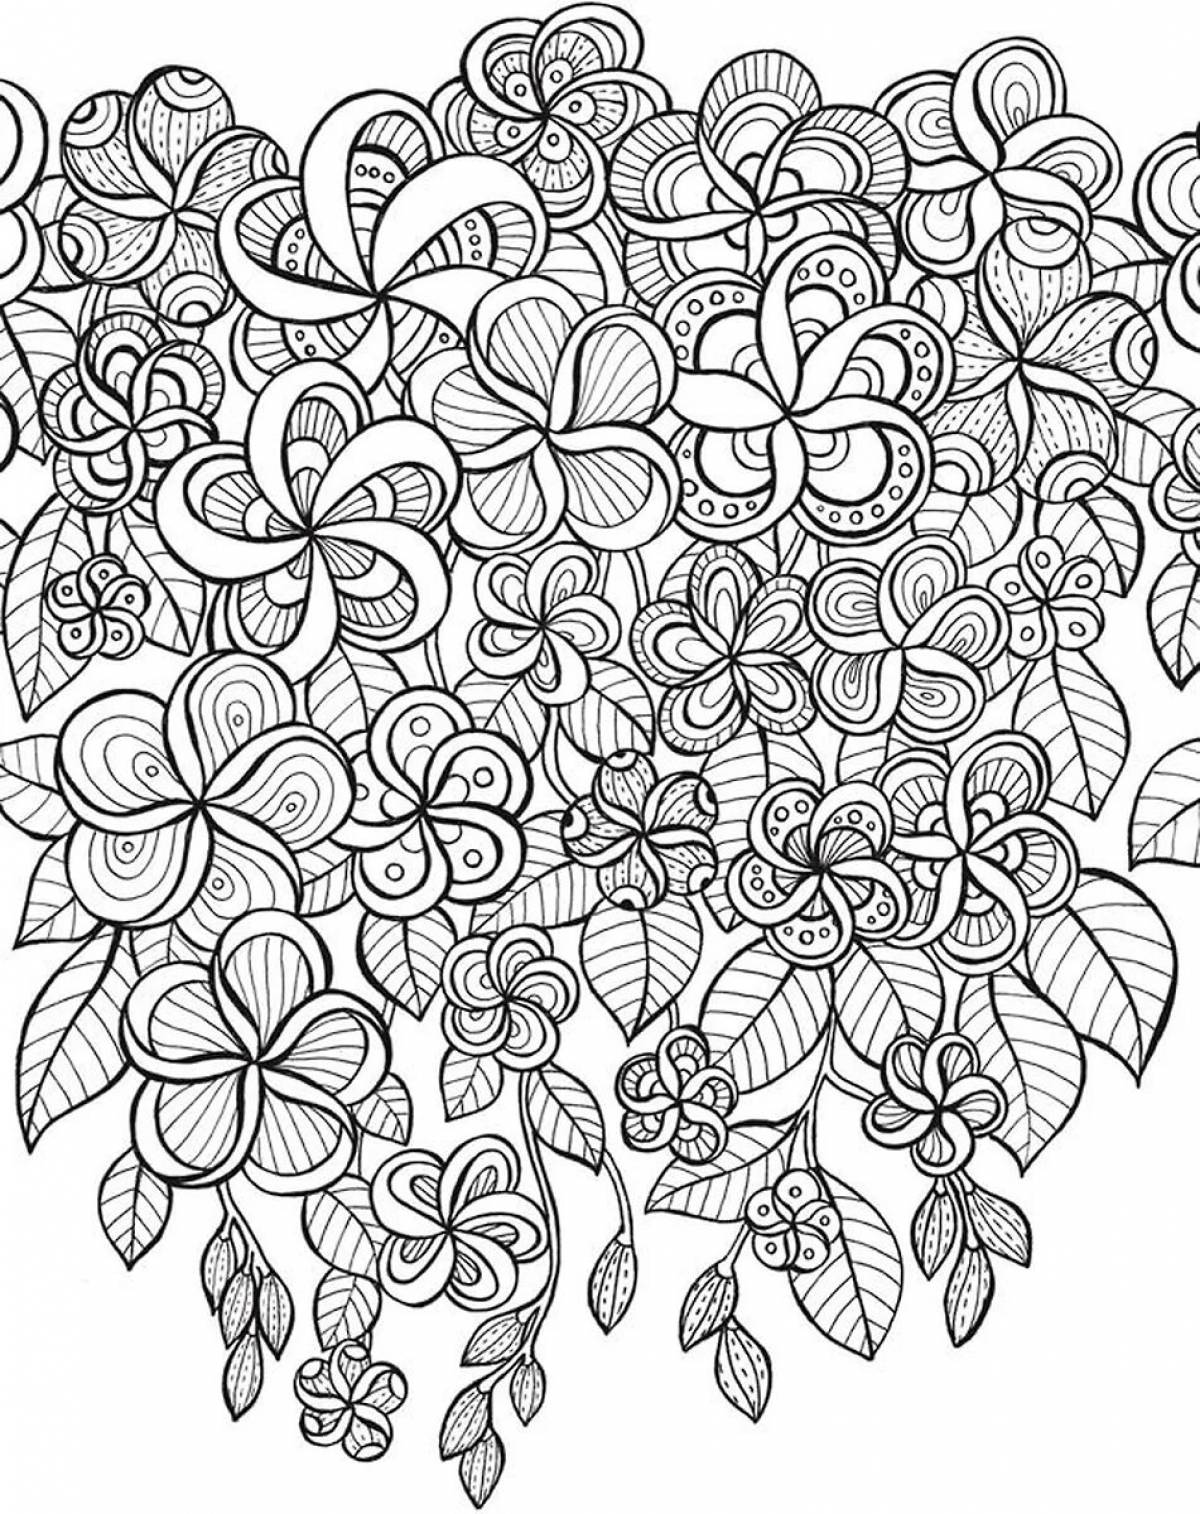 Great anti-stress coloring book for markers